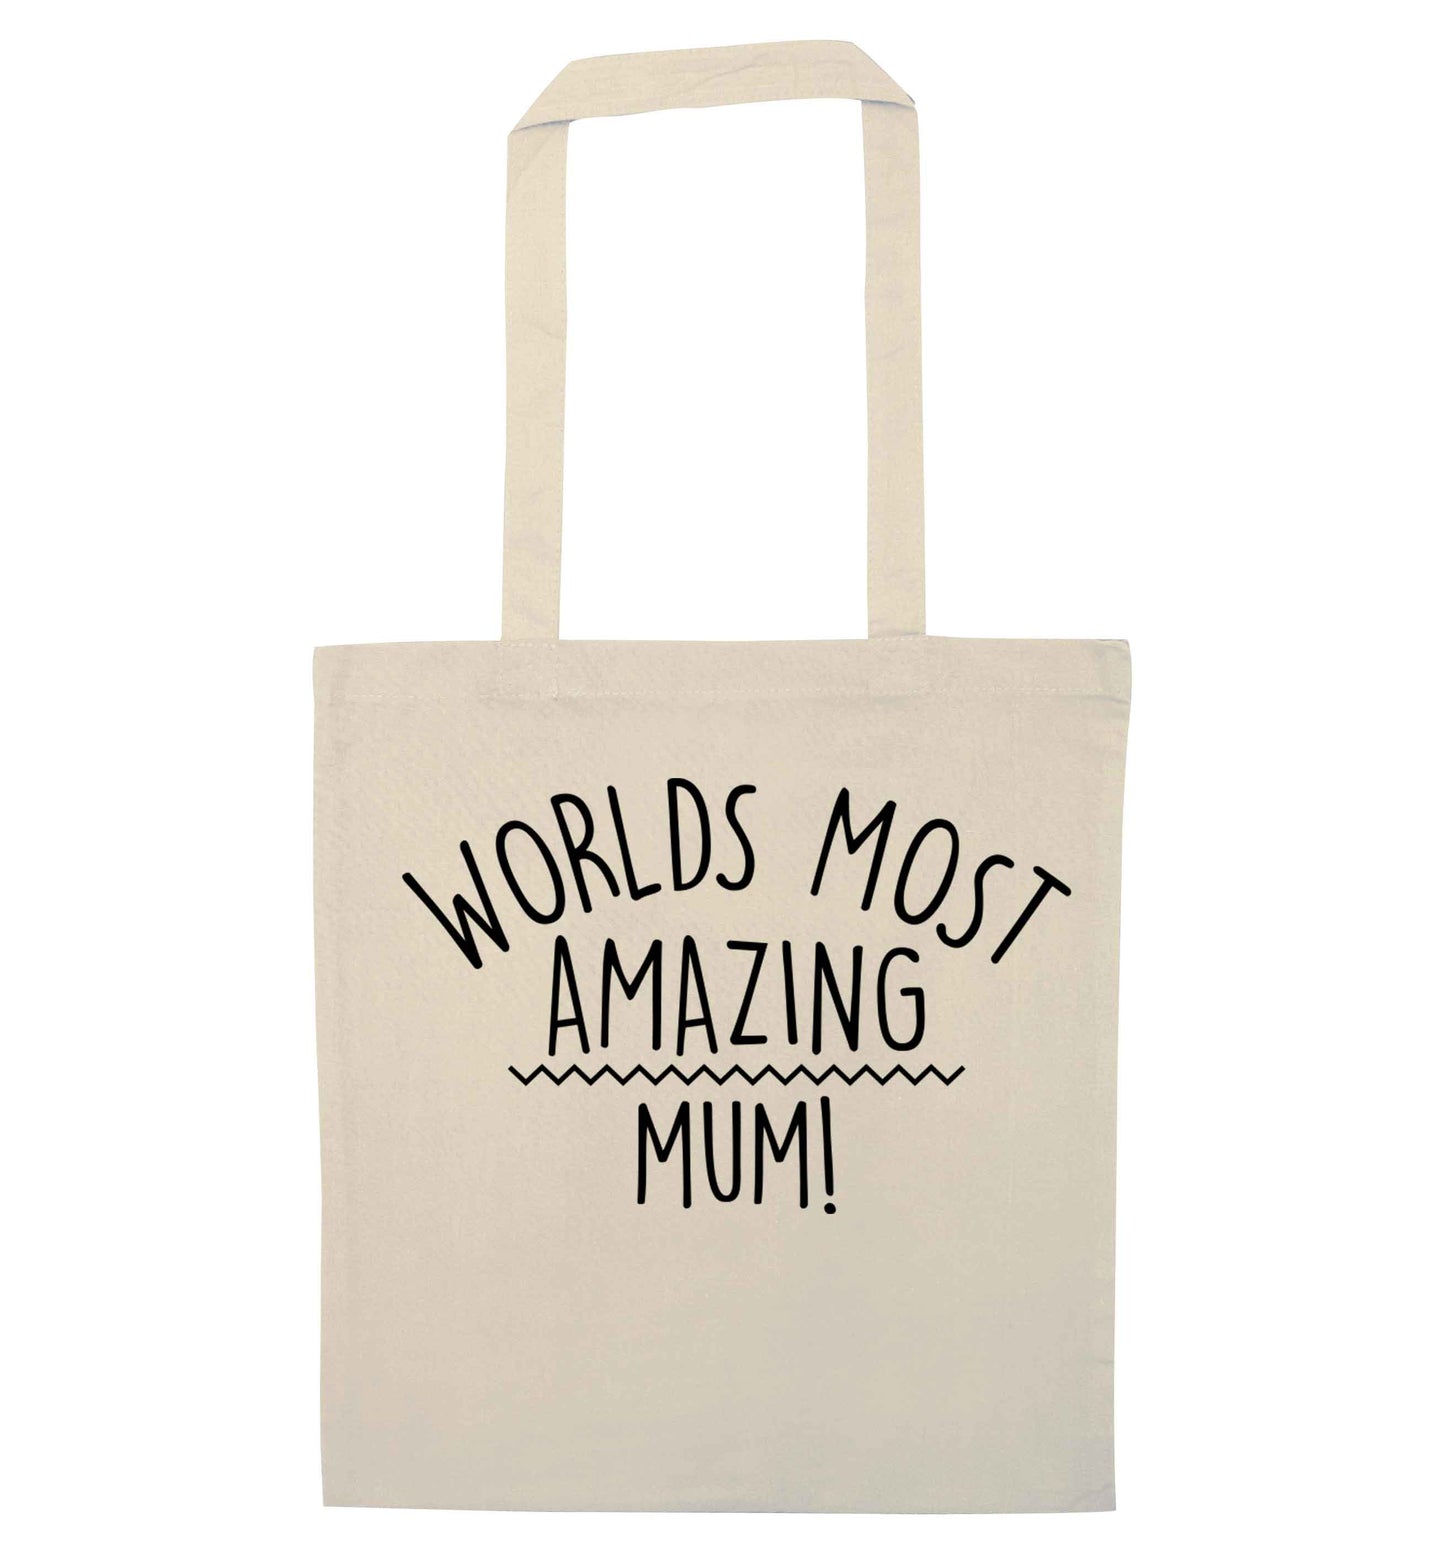 Worlds most amazing mum natural tote bag